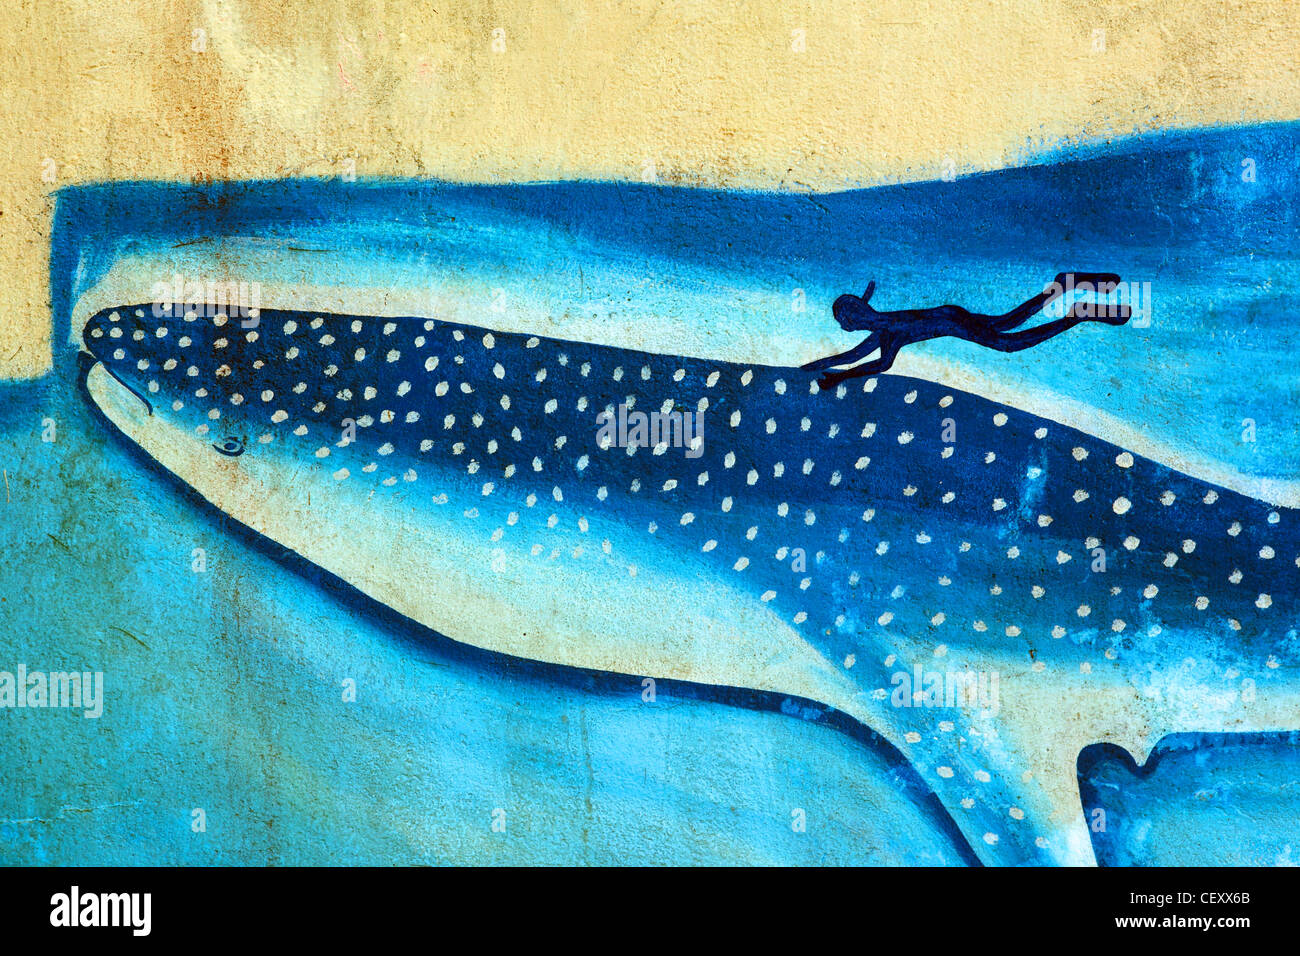 Mural of a whale shark. Donsol, Sorsogon, Luzon, Albay, Bicol, Philippines, South-East Asia, Asia Stock Photo